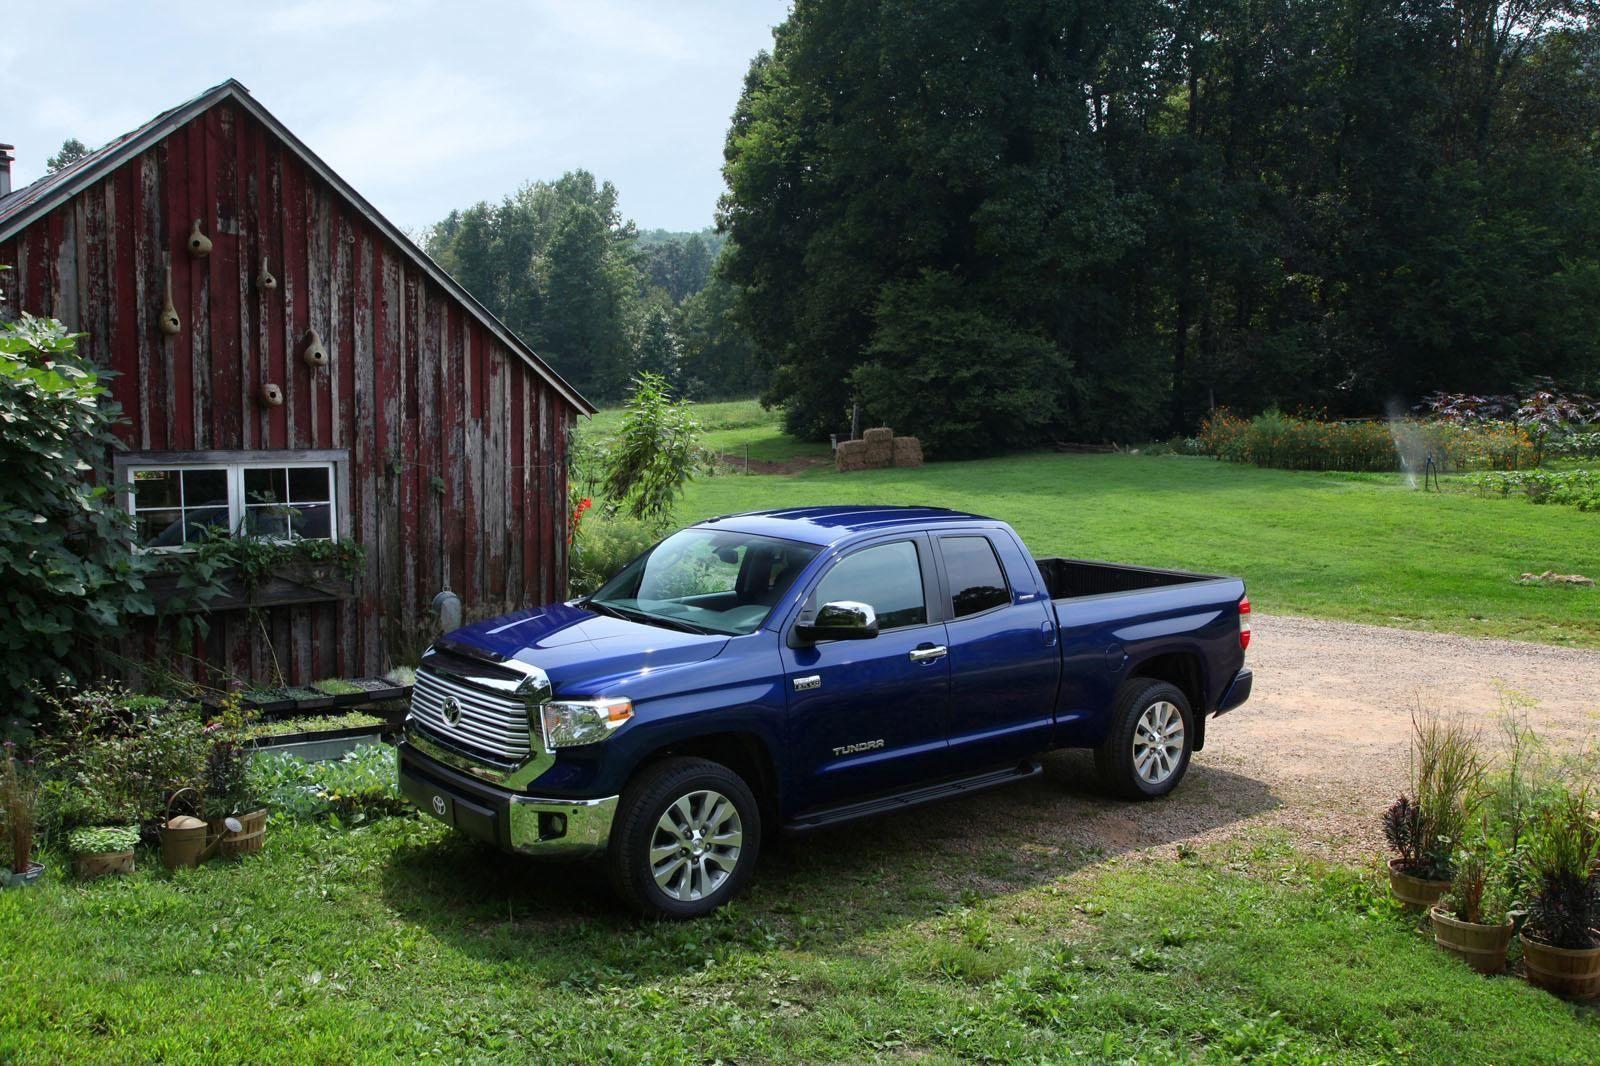 Toyota Tundra 2015 photo 110543 picture at high resolution